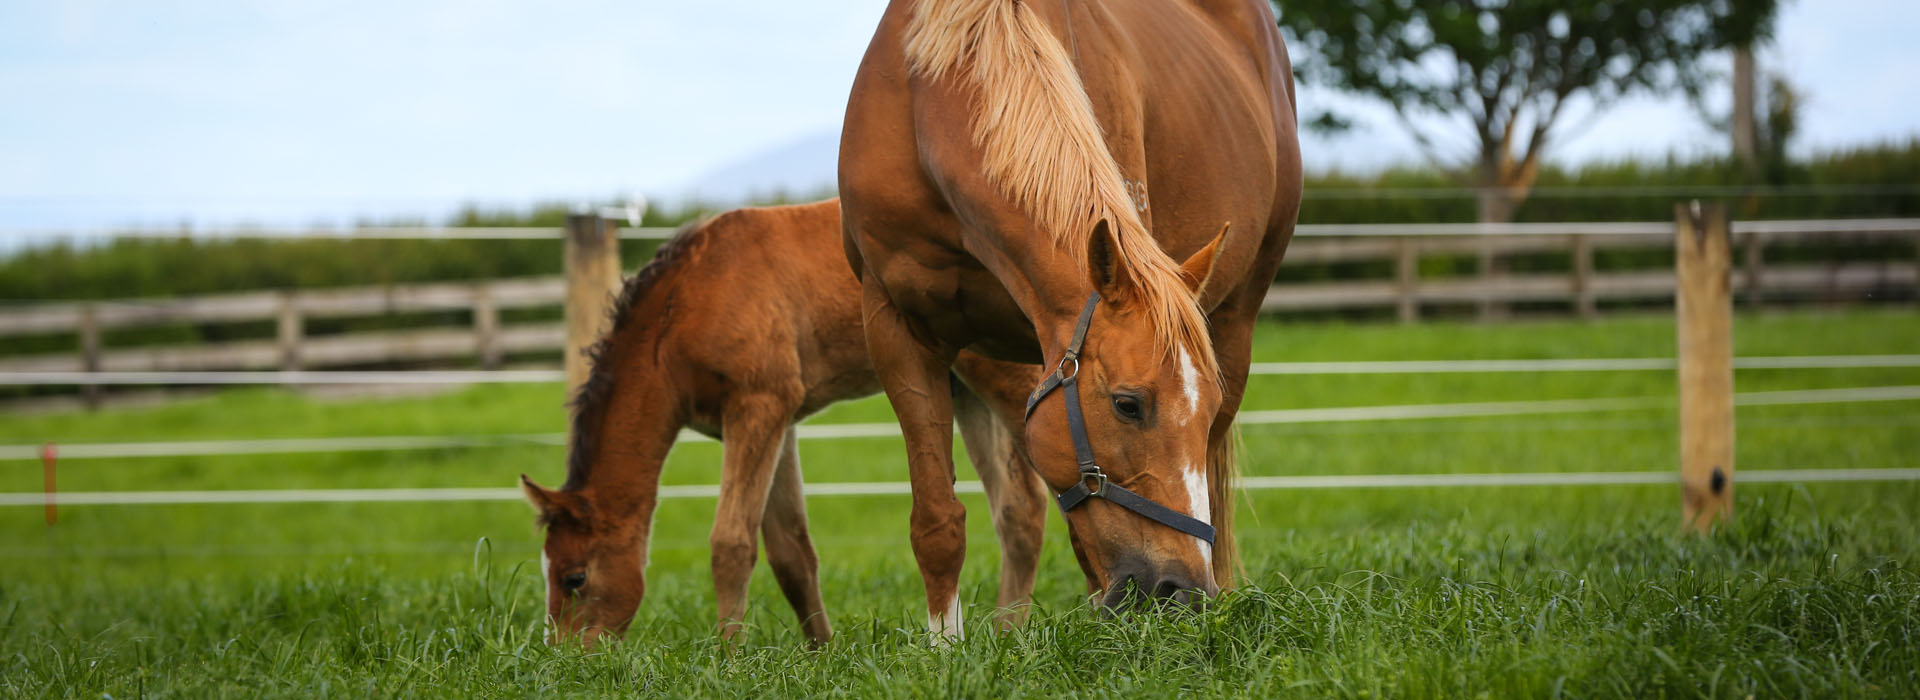 EquiBreed_NZ_homepage_EQUINE REPRODUCTIVE SERVICES